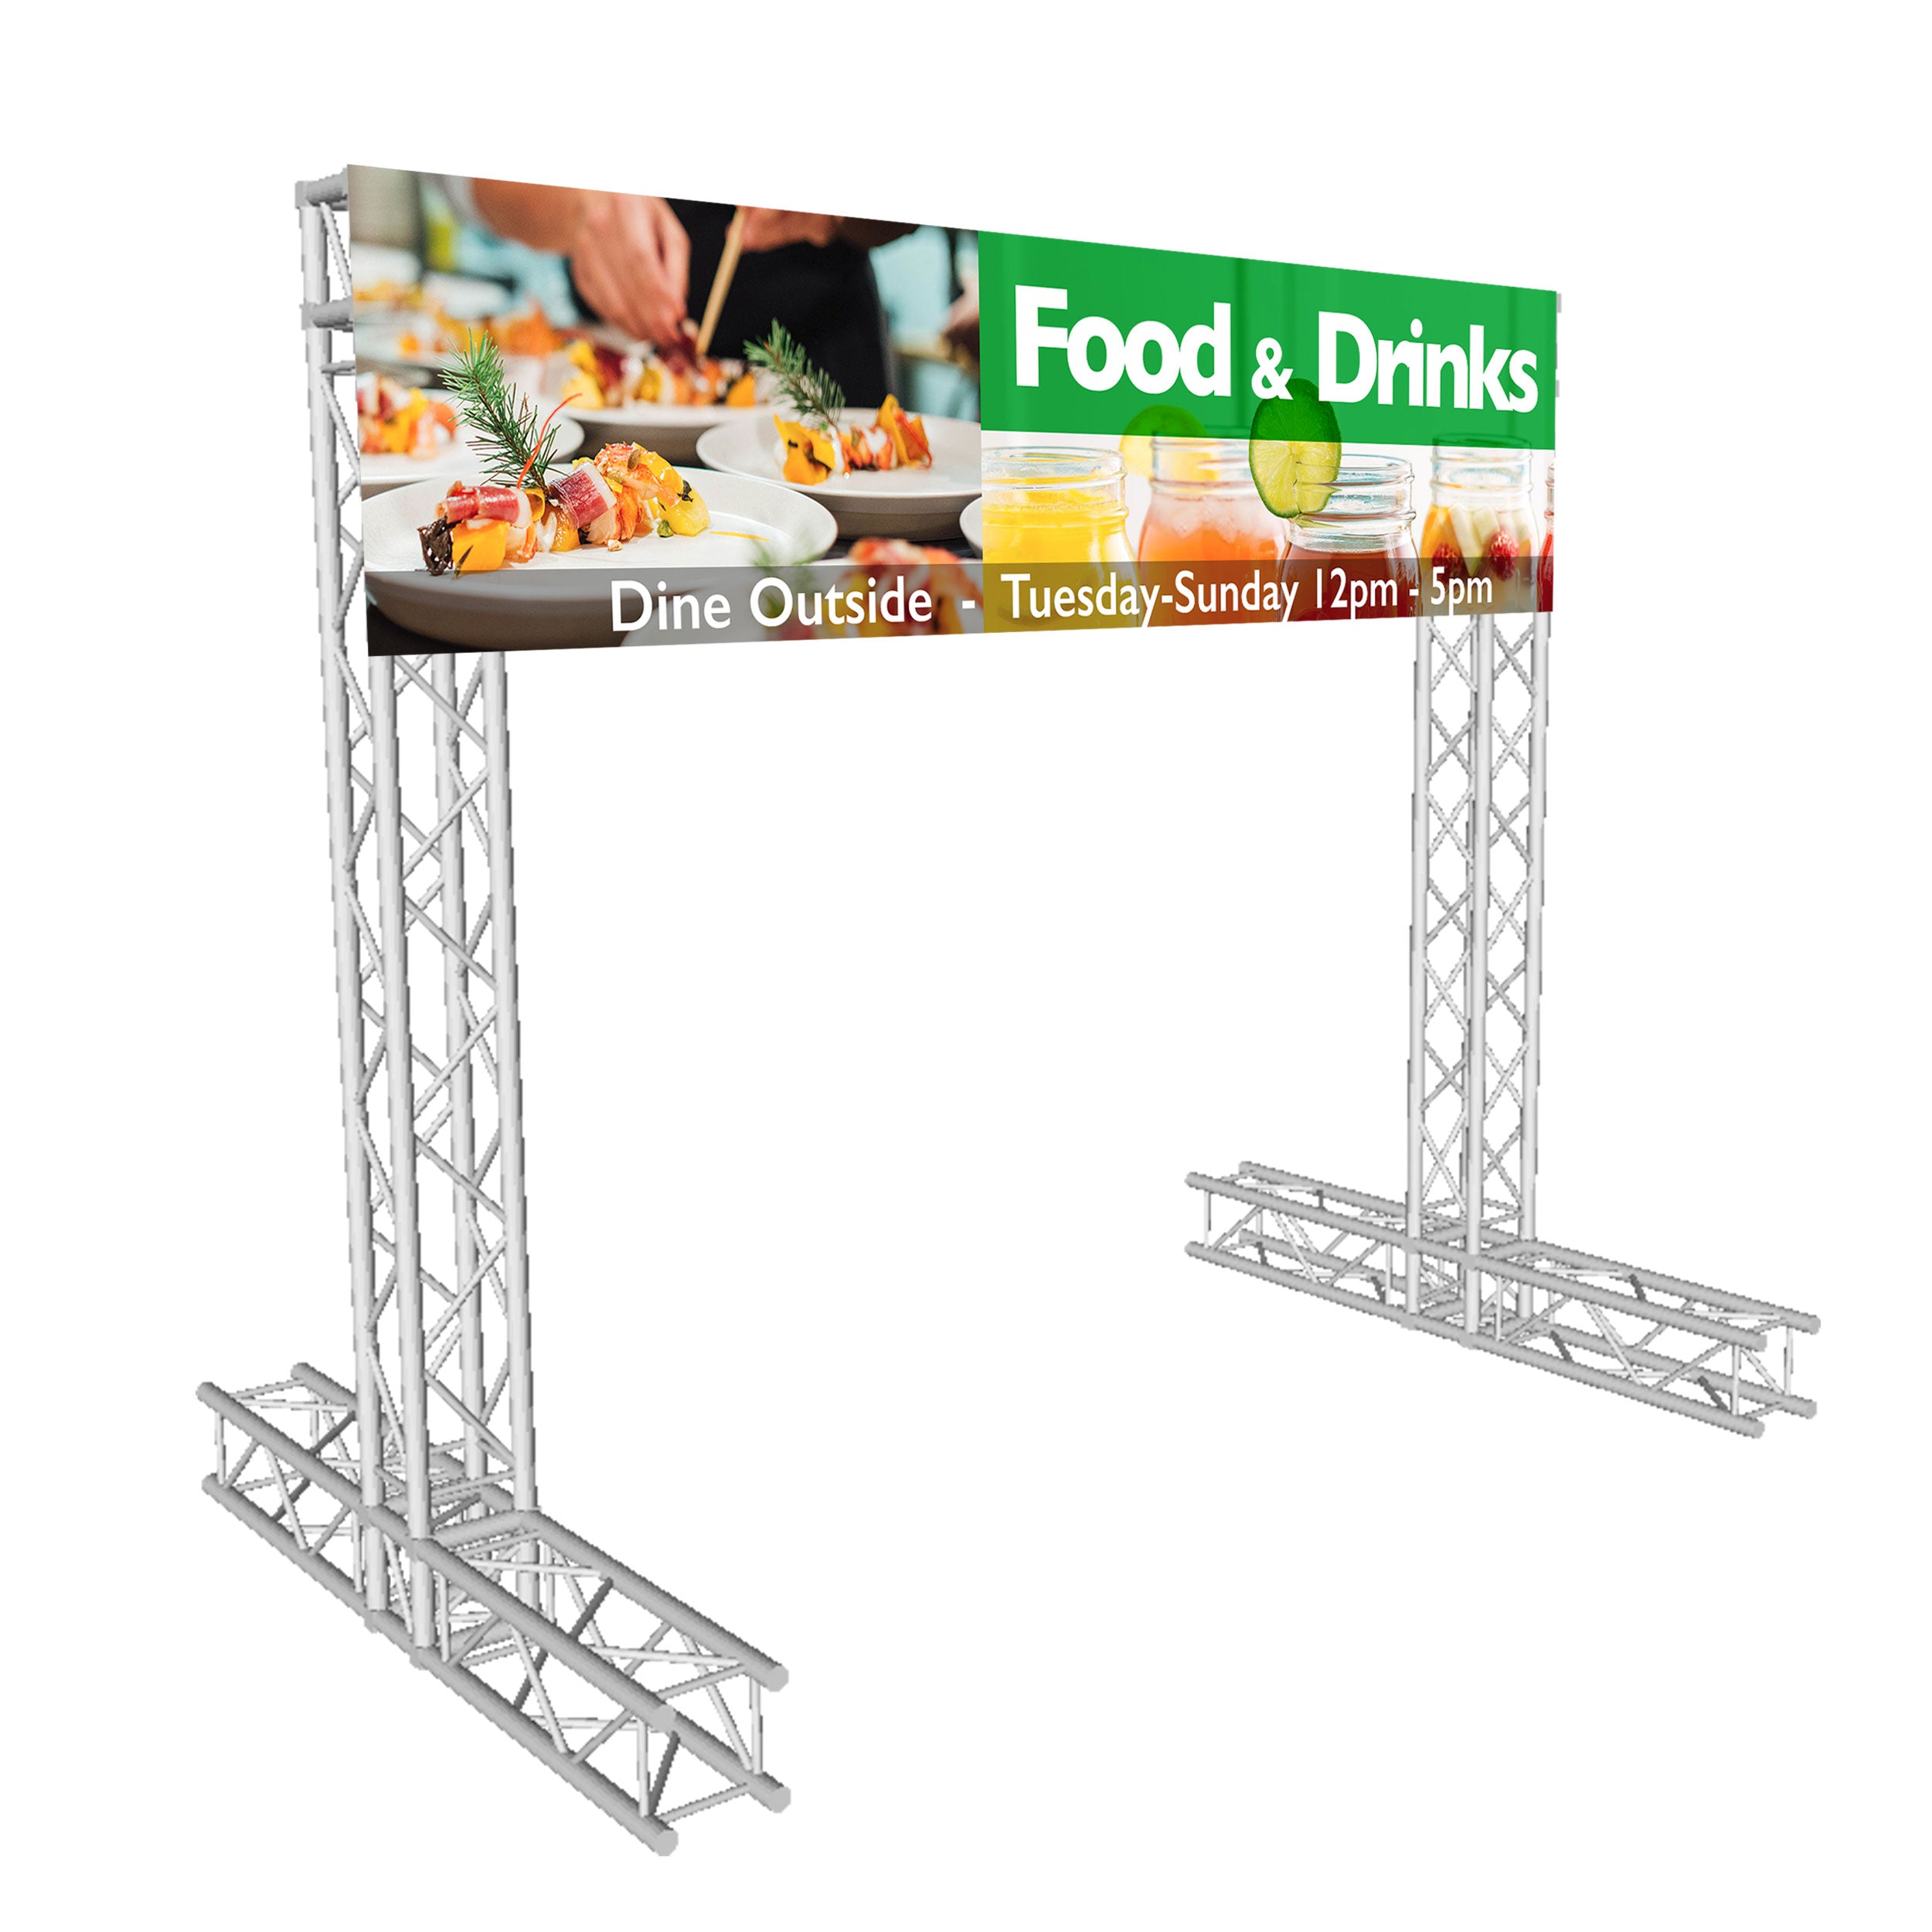 Pro X 8x8' Ft K-Truss Economy Aluminum Truss Outdoor Banner Display System - Banner Not Included KT-SQ8X8DISPLAY